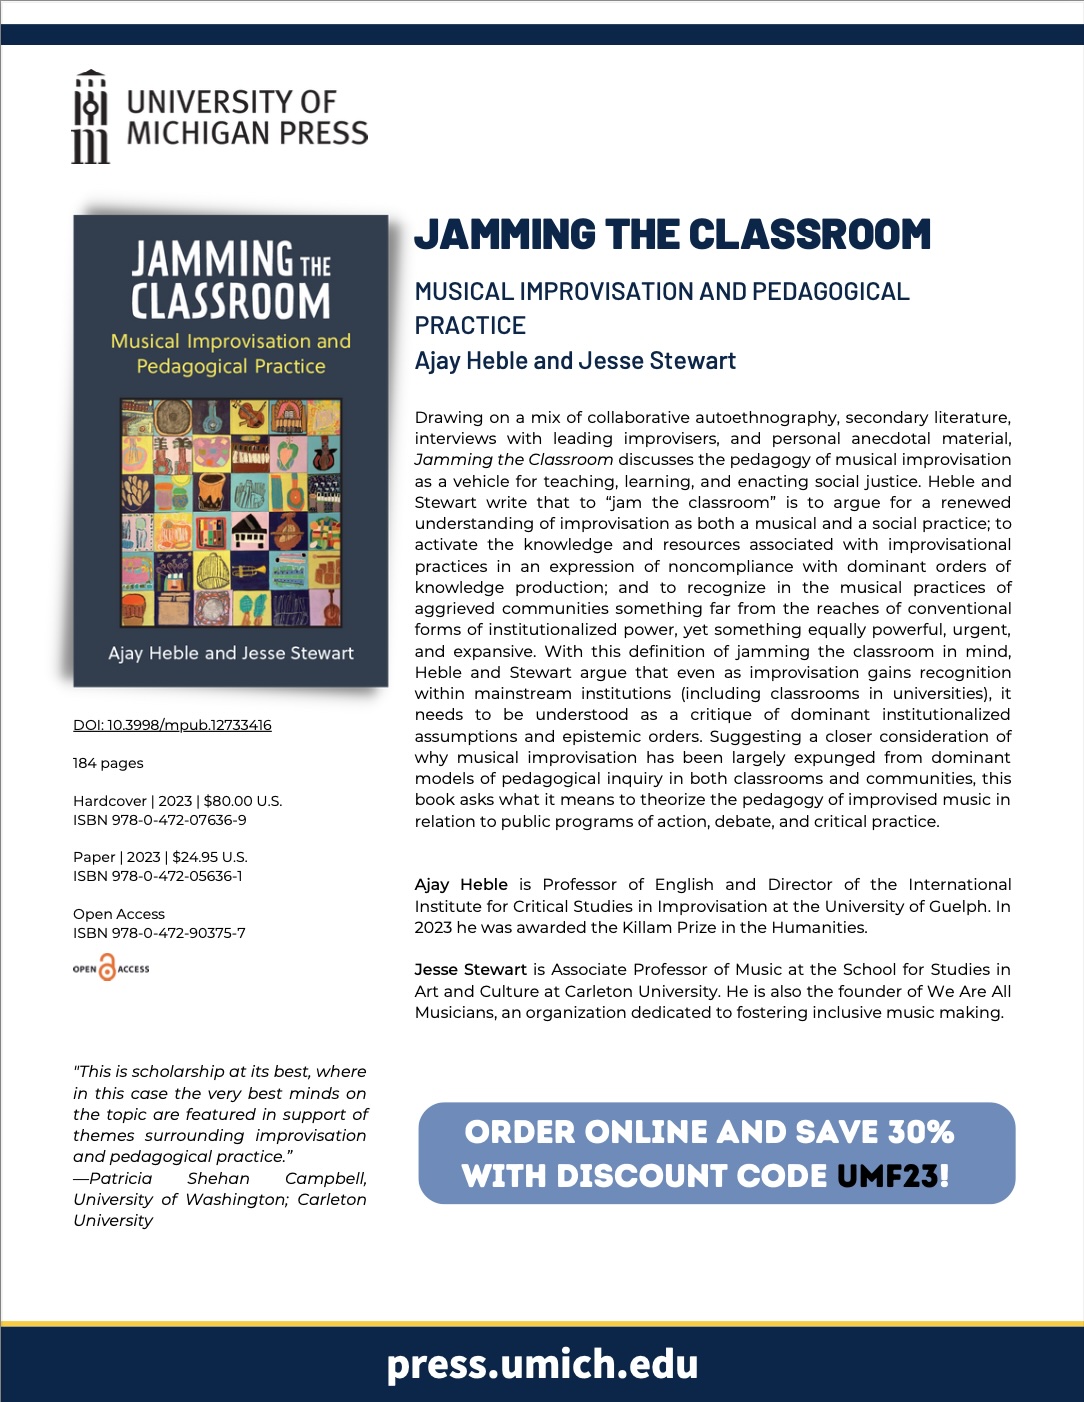 poster of Jamming the Classroom book